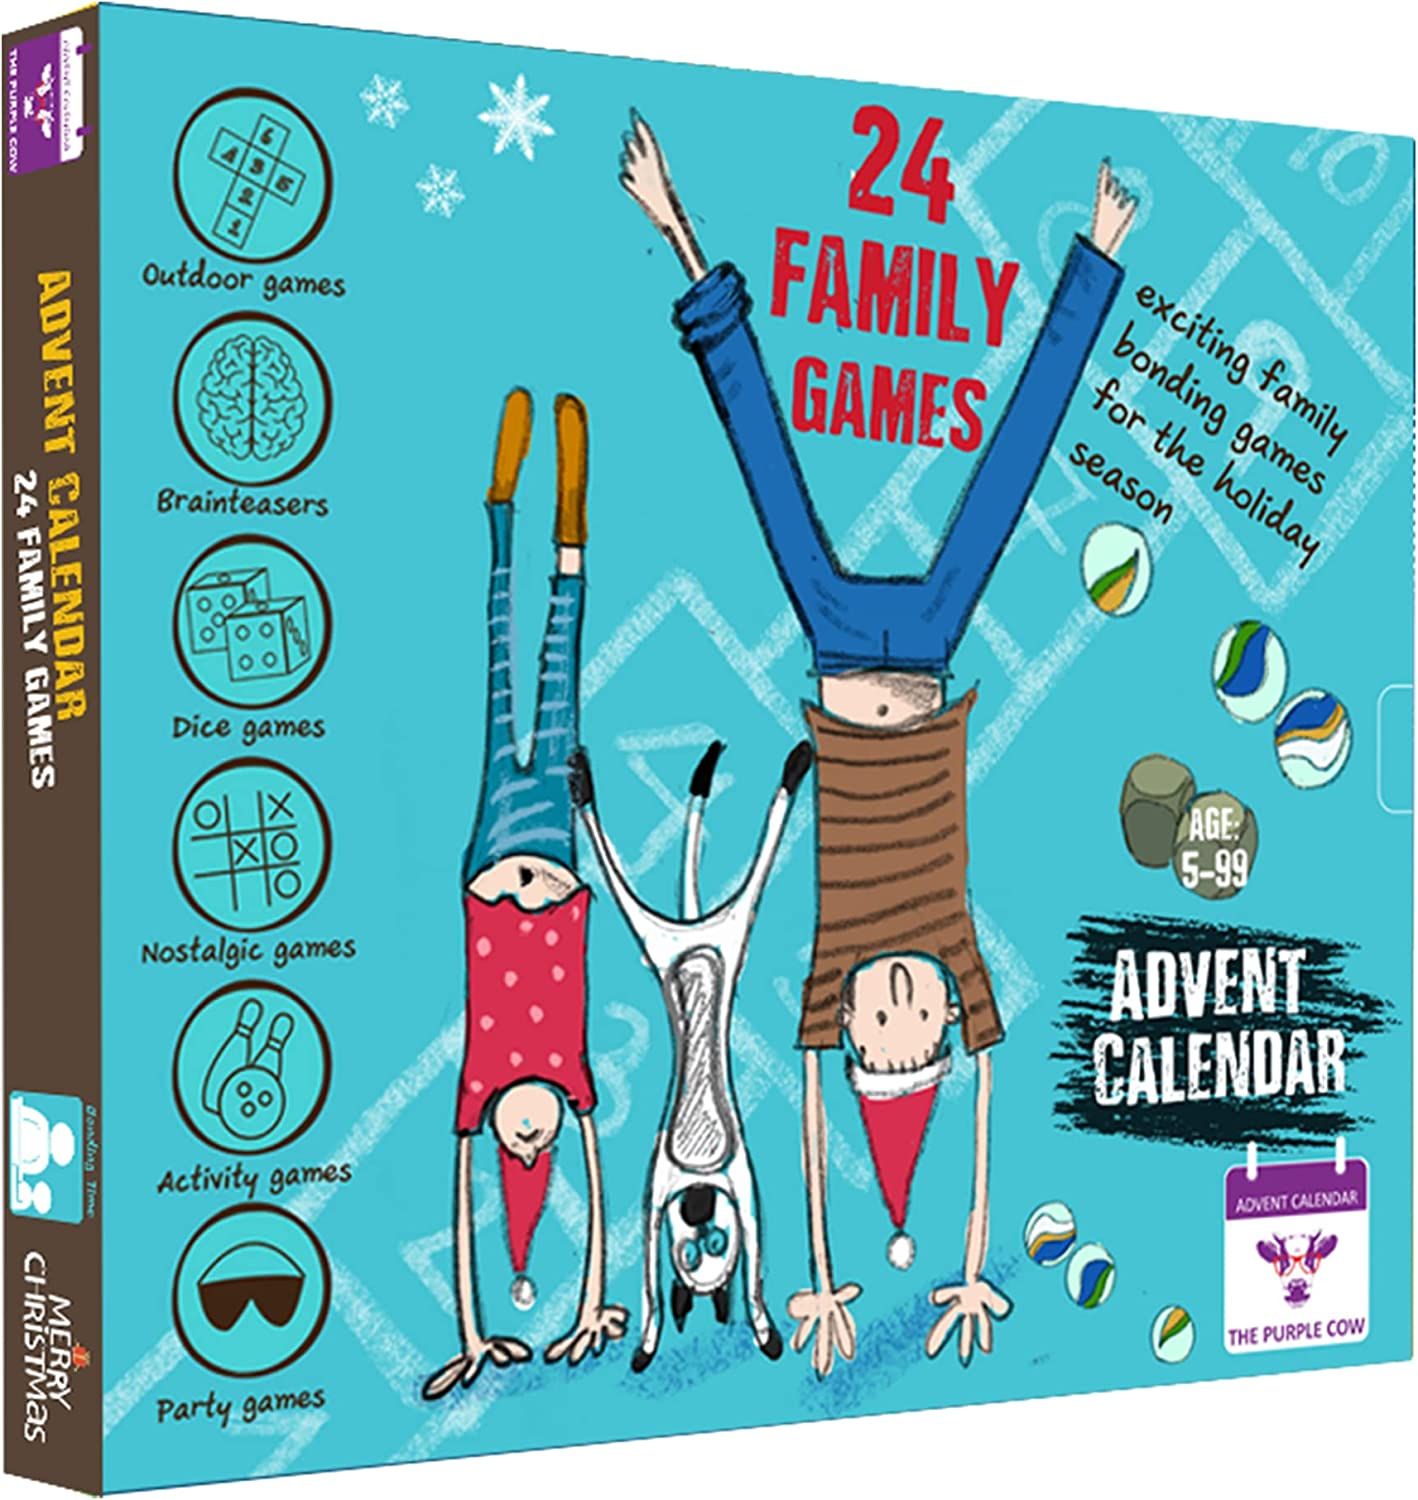 NEW 2022 Advent Calendar FAMILY GAMES by The Purple Cow. 24 OF THE BEST EVER FAMILY GAMES IN ONE ... | Amazon (US)